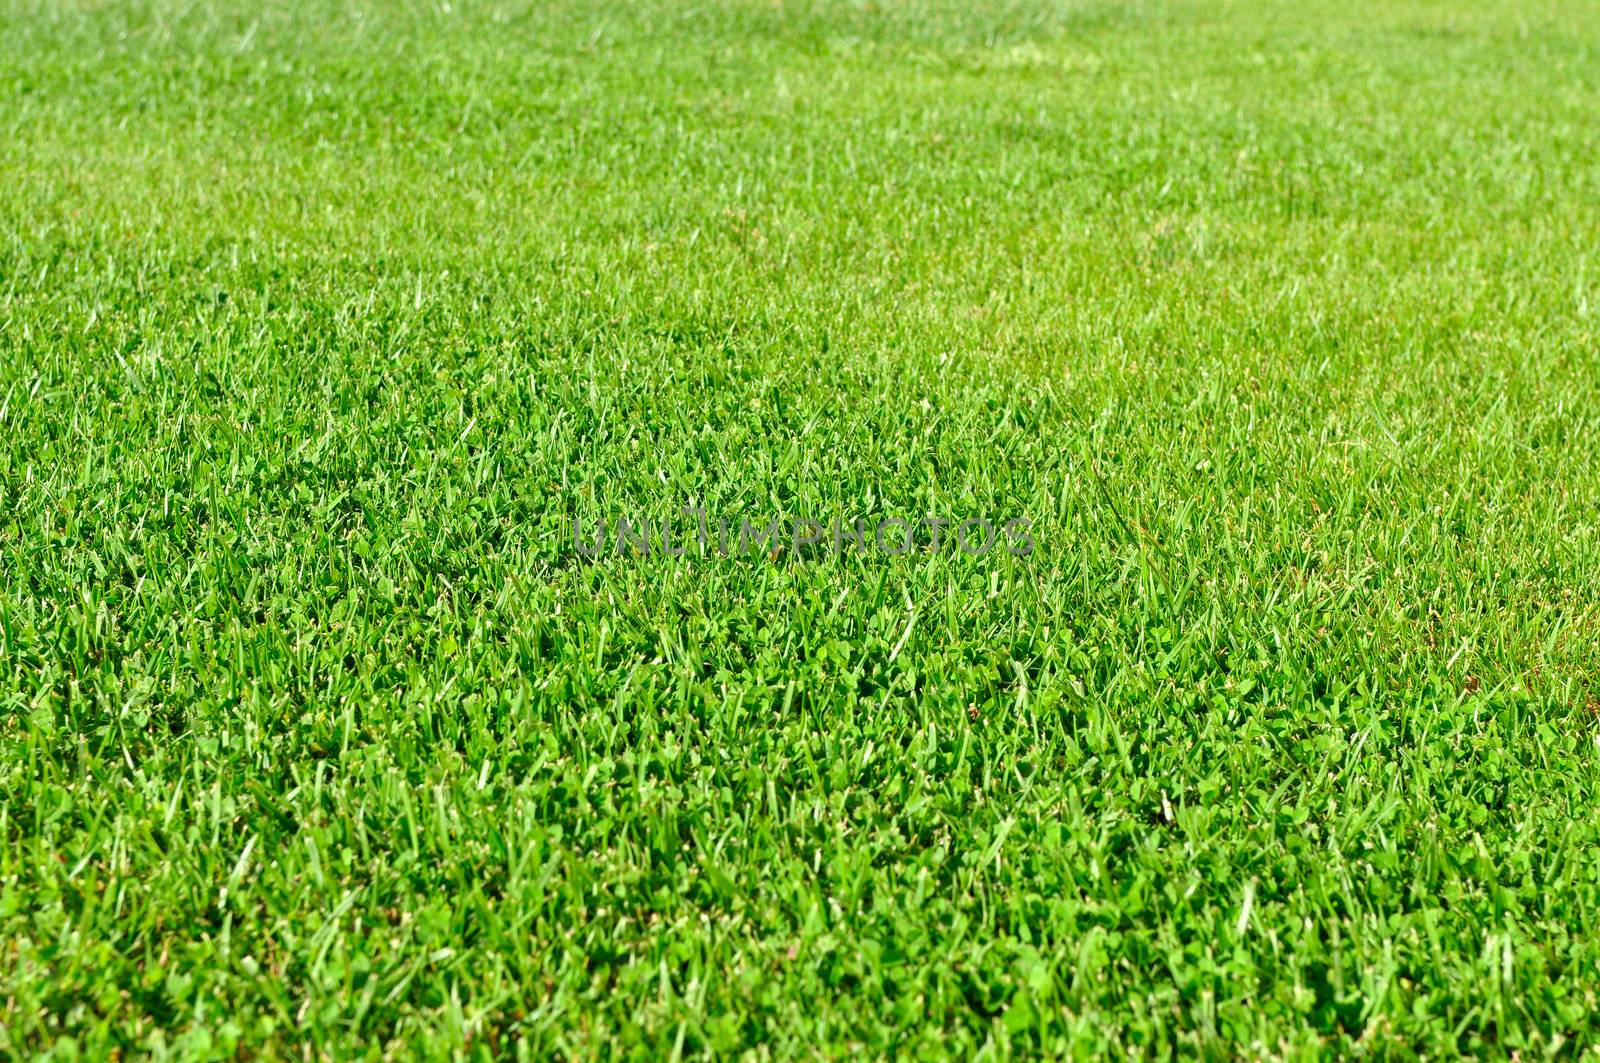 A fresh natural grass field, low depth of field, focus on the middle of the frame